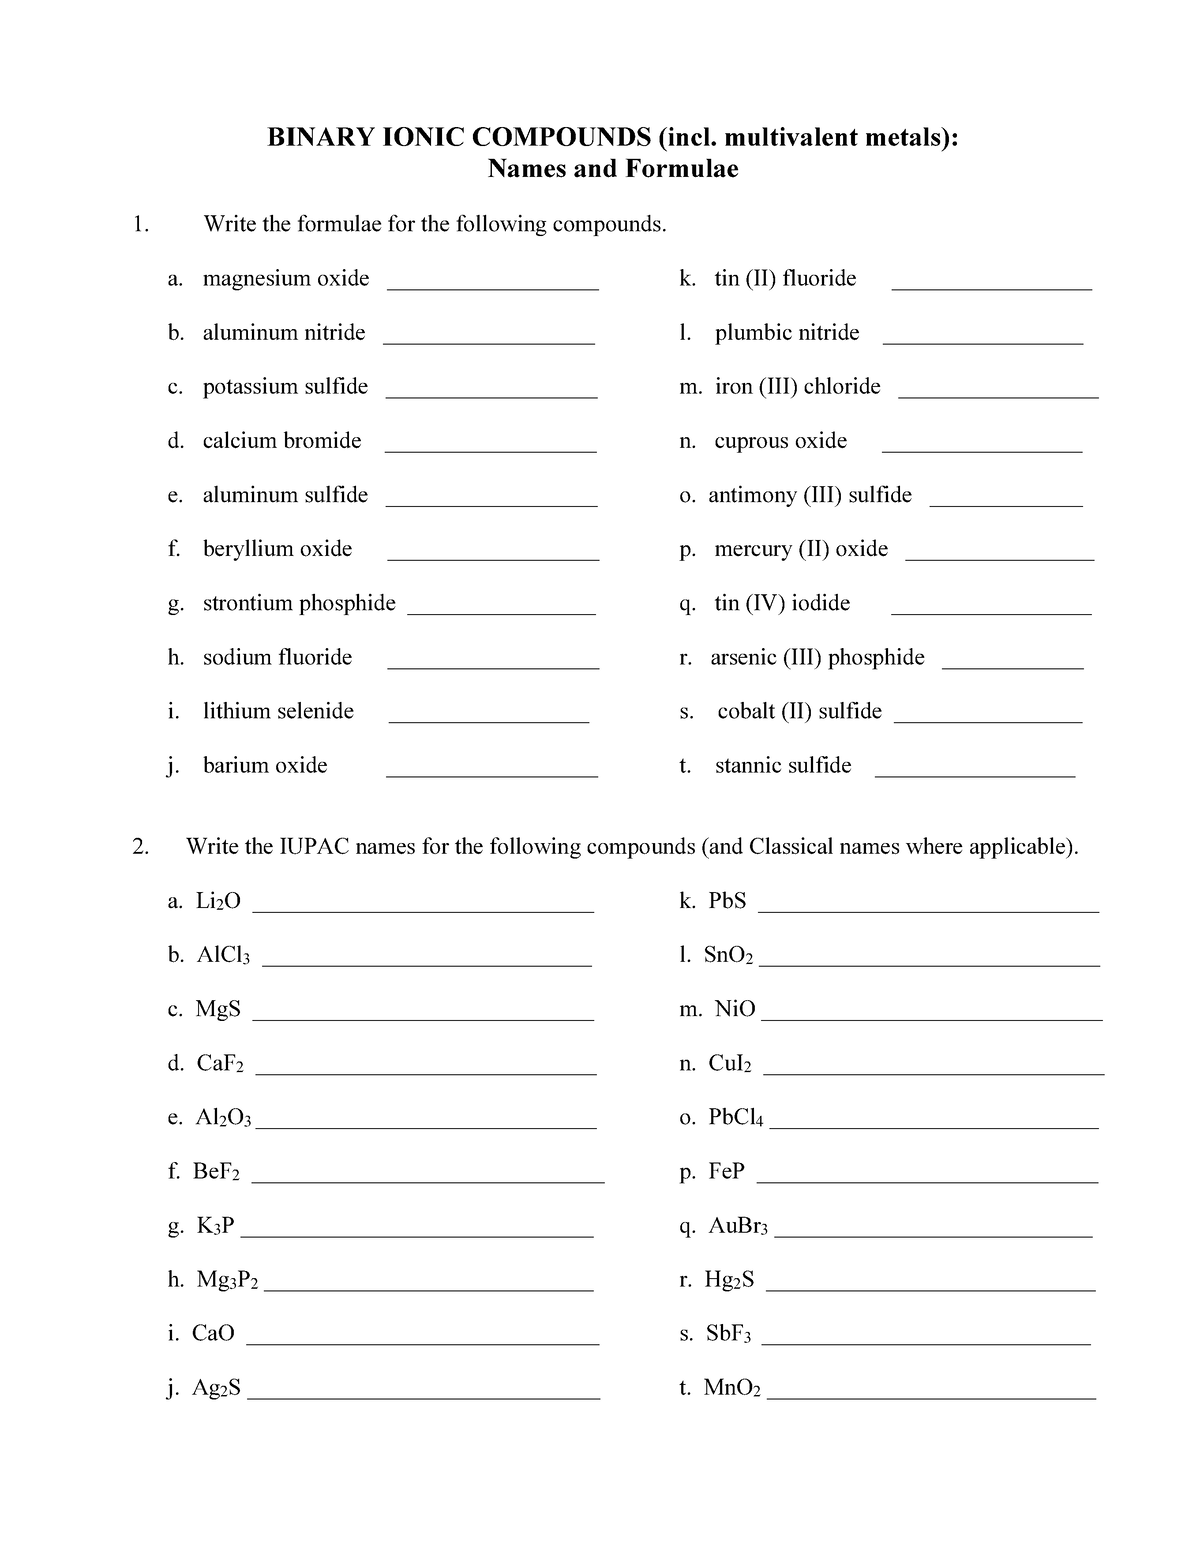 Nomenclature Practice Worksheets - BINARY IONIC COMPOUNDS (incl ...